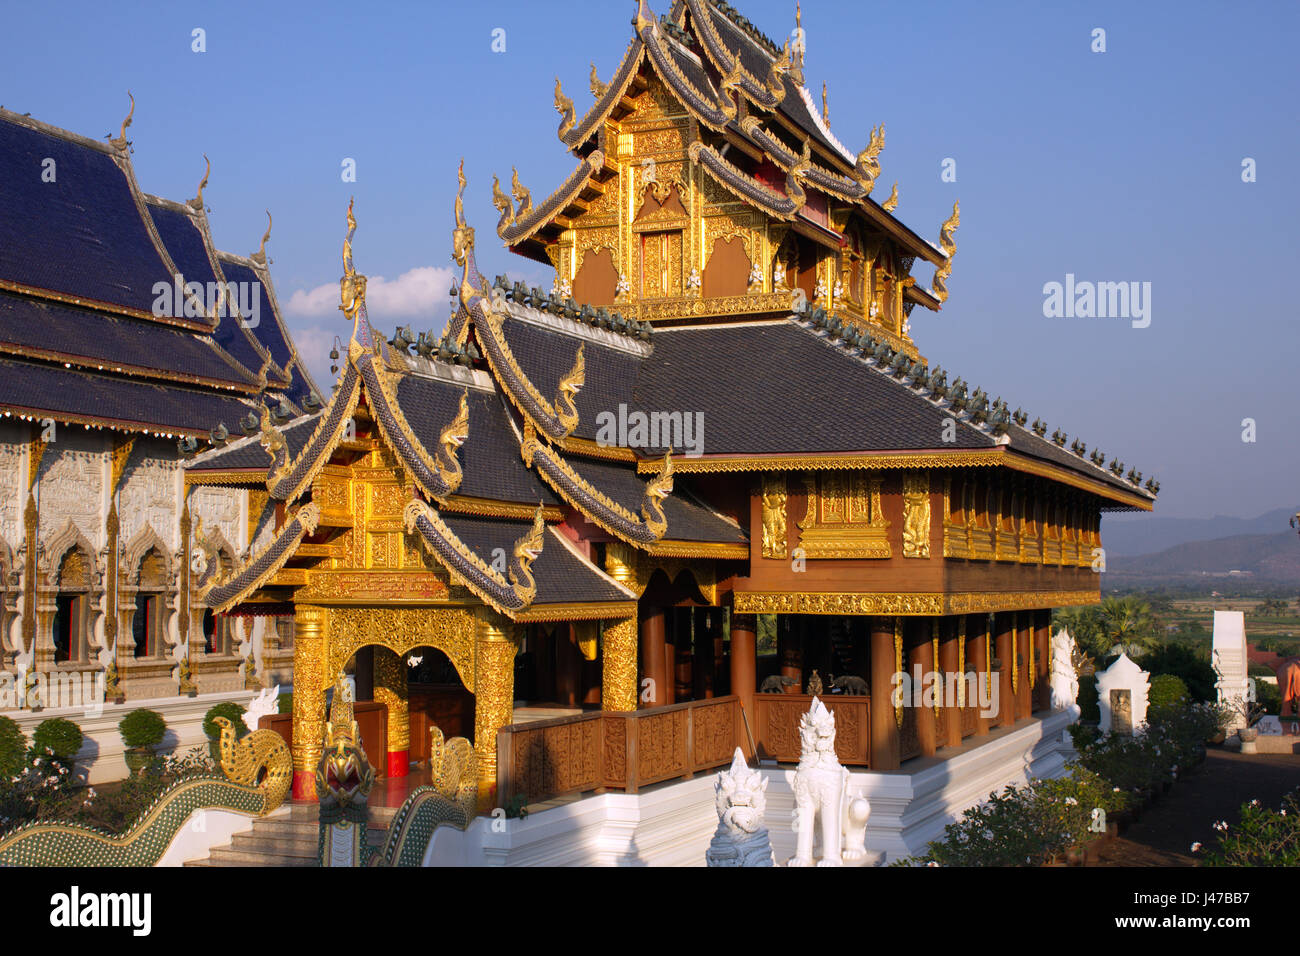 The magnificent Lanna-style teakwood viharn (sermon hall) at the Buddhist temple complex of Wat Ban Den, Mae Taeng, Chiang Mai, Thailand Stock Photo